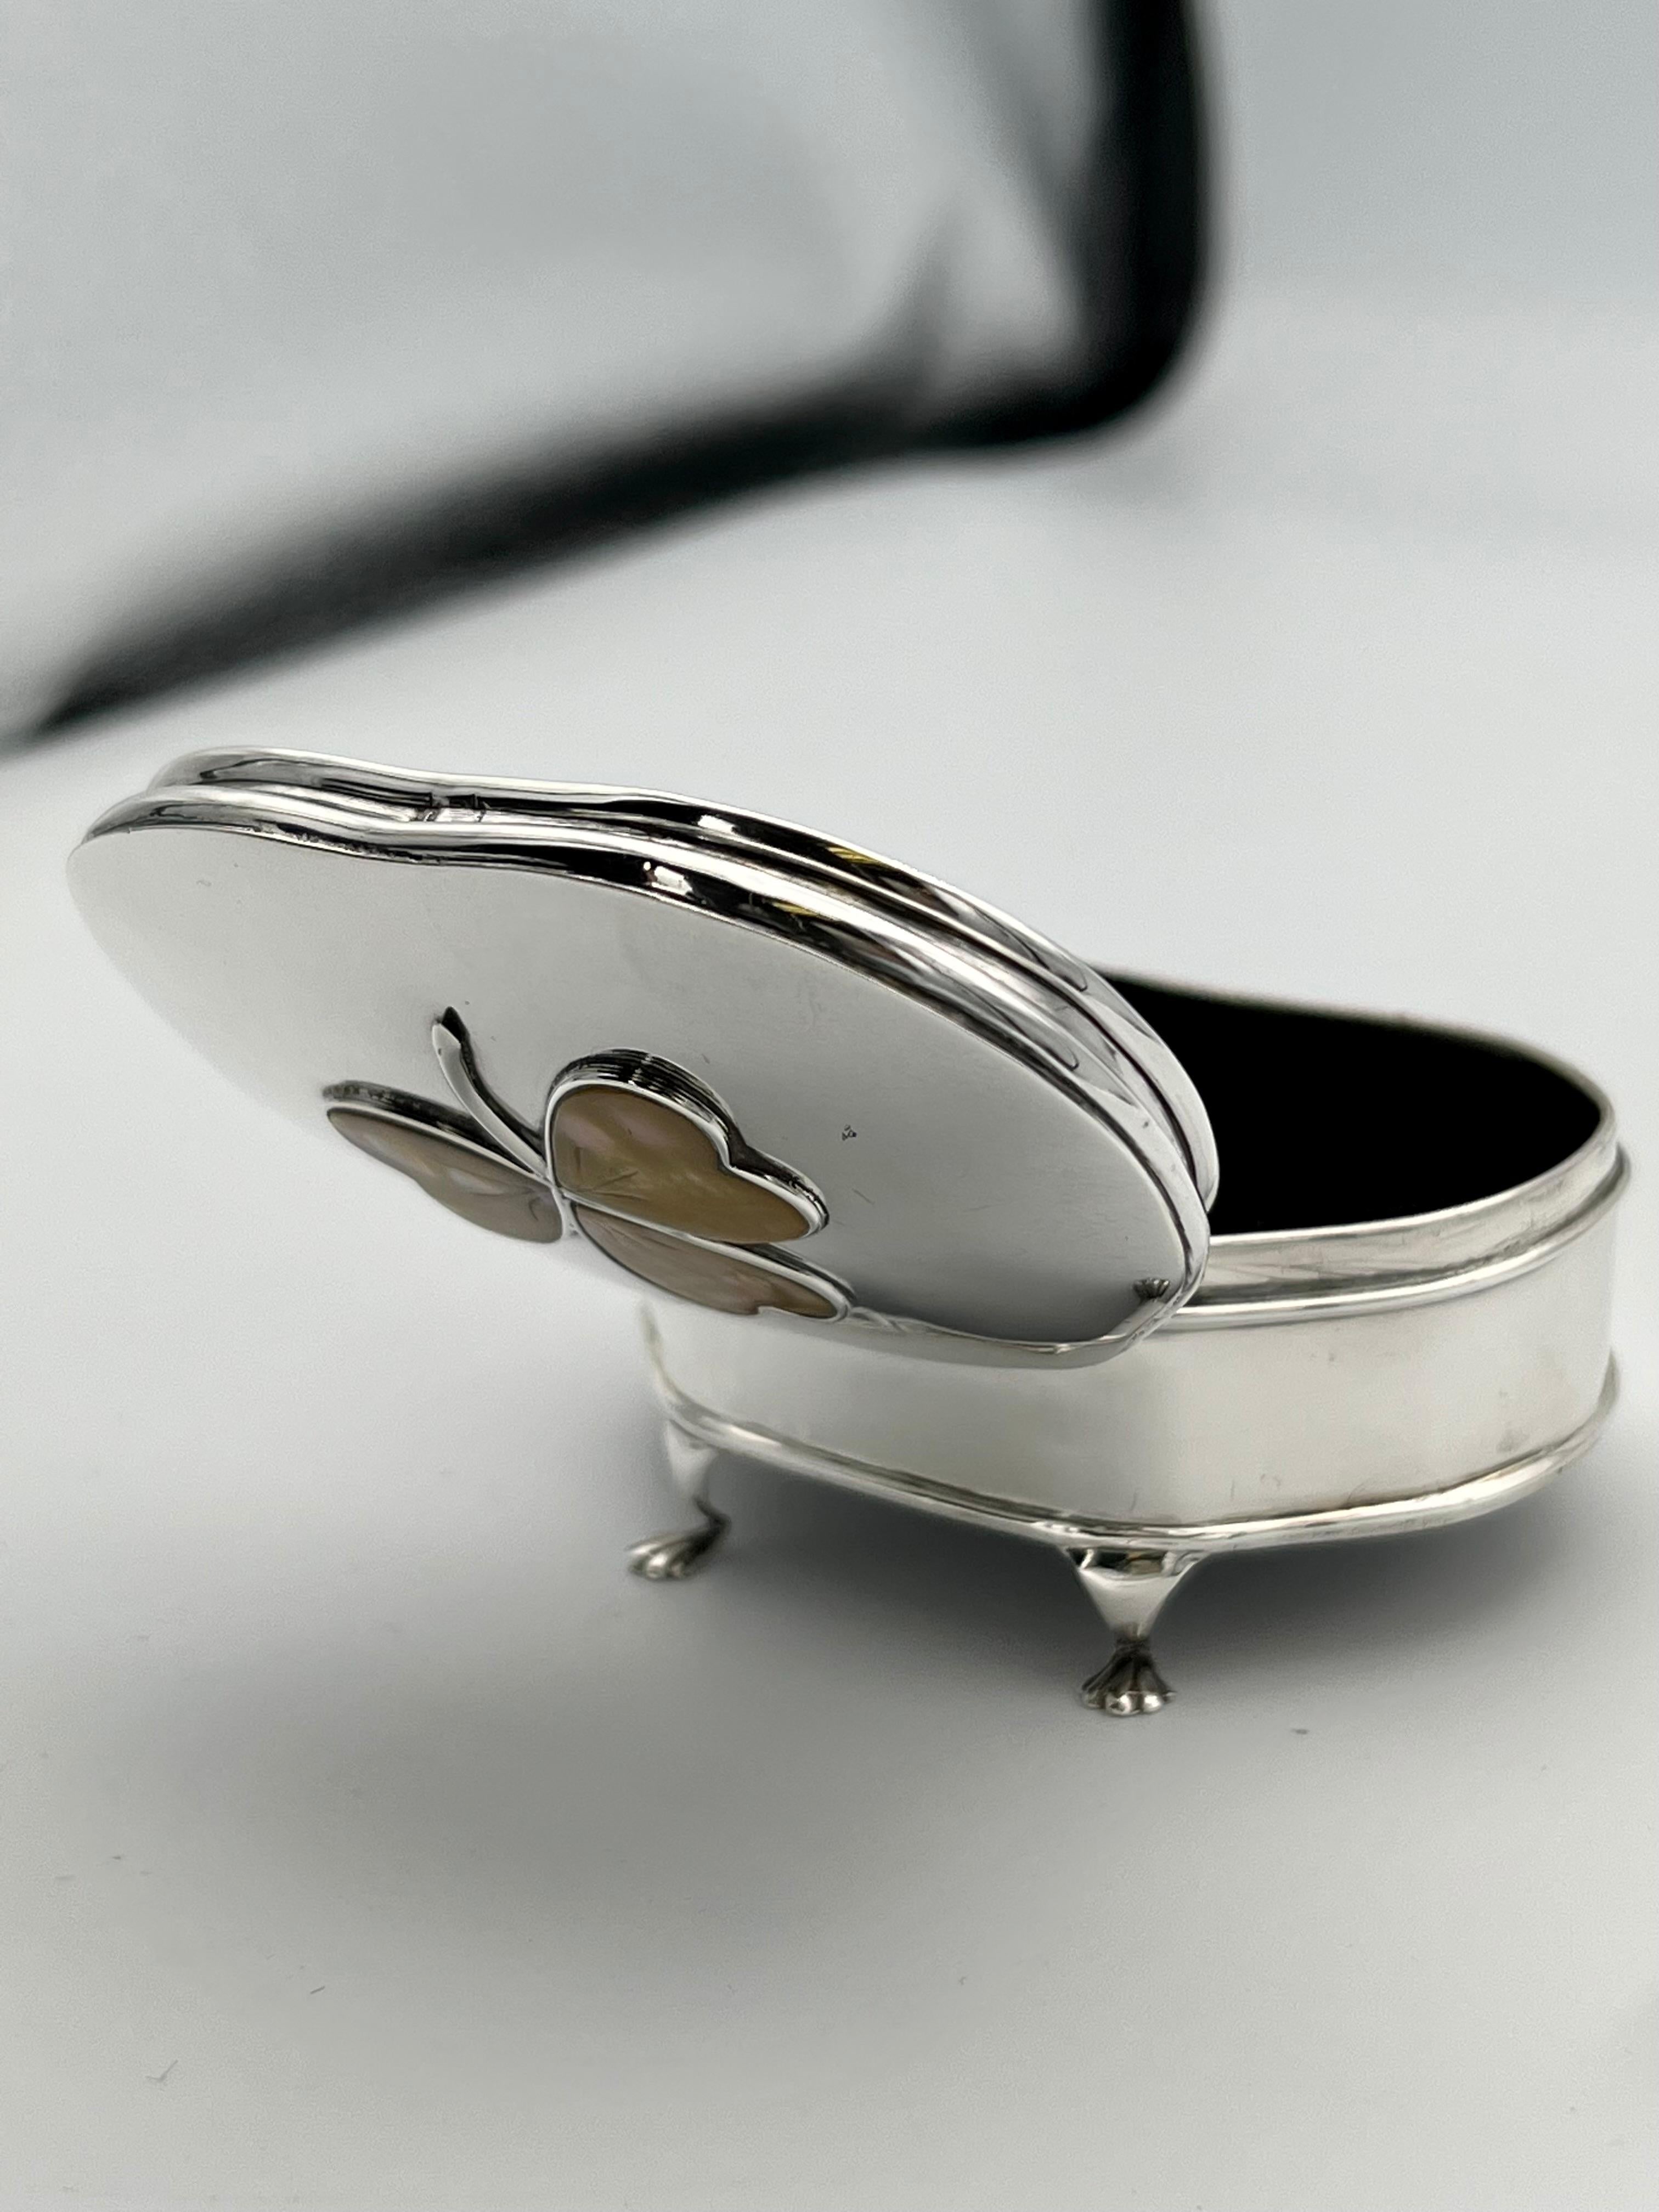 Lovely and unique hinged jewelry box. Graceful bowed shape. On four legs with paw feet. On top is an applied clover or trefoil, inlaid with mother-of-pearl . Very solid gauge silver. The inside top and bottom have a soft black velvet lining. 3 1/4